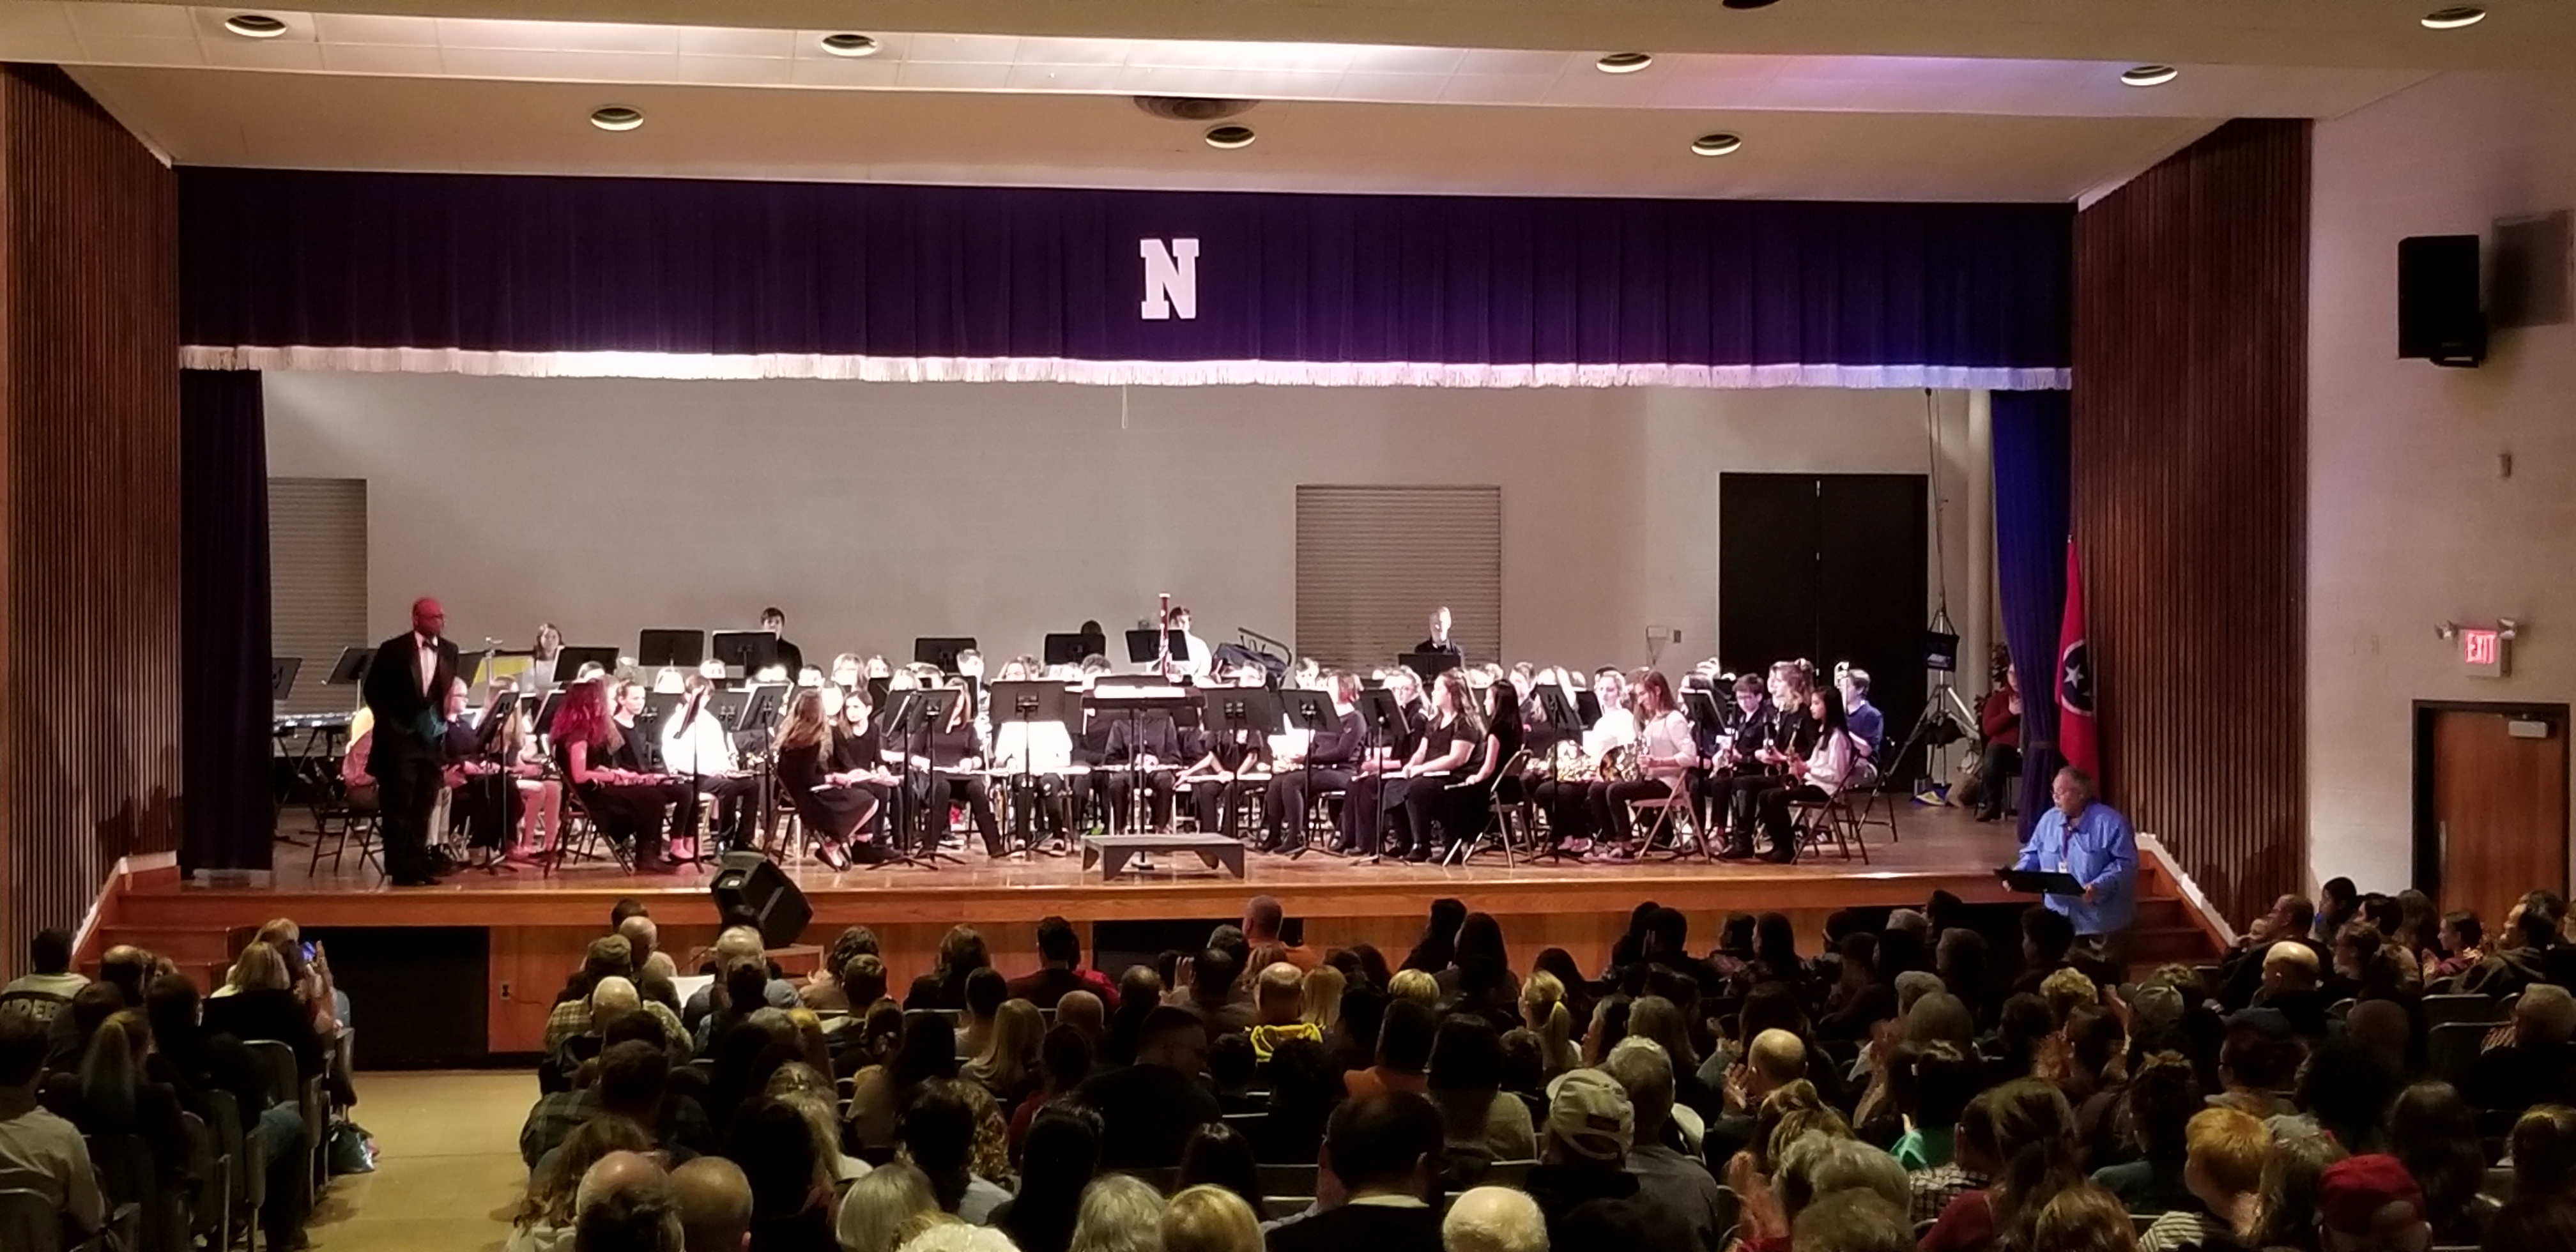 Knox County Middle School Honors Band Concert, January 18, 2019